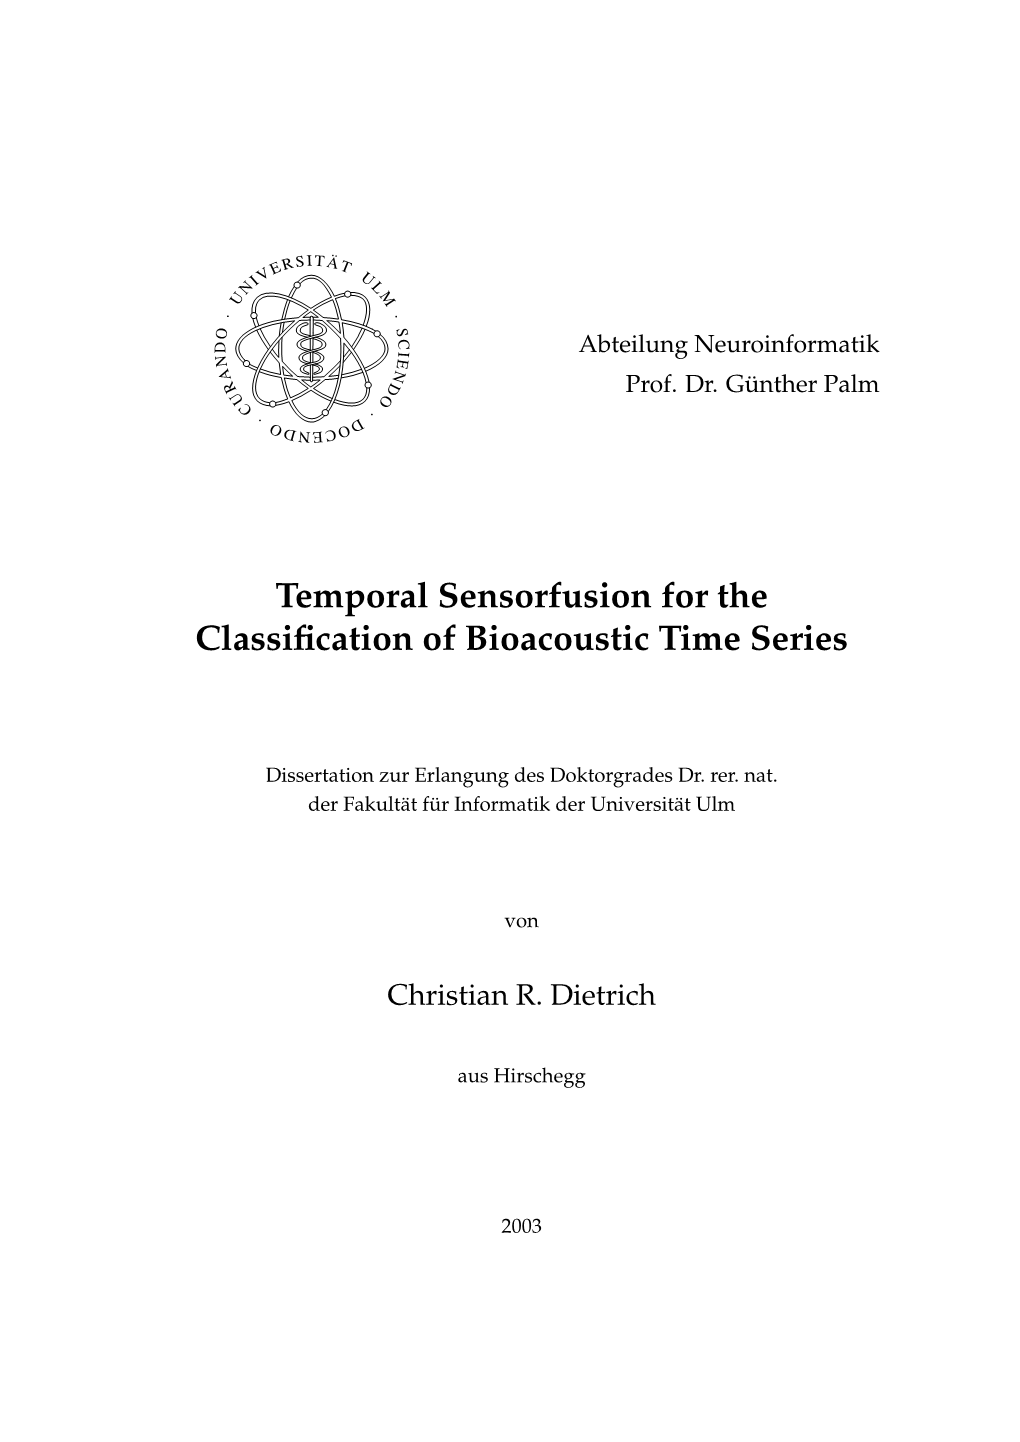 Temporal Sensorfusion for the Classification of Bioacoustic Time